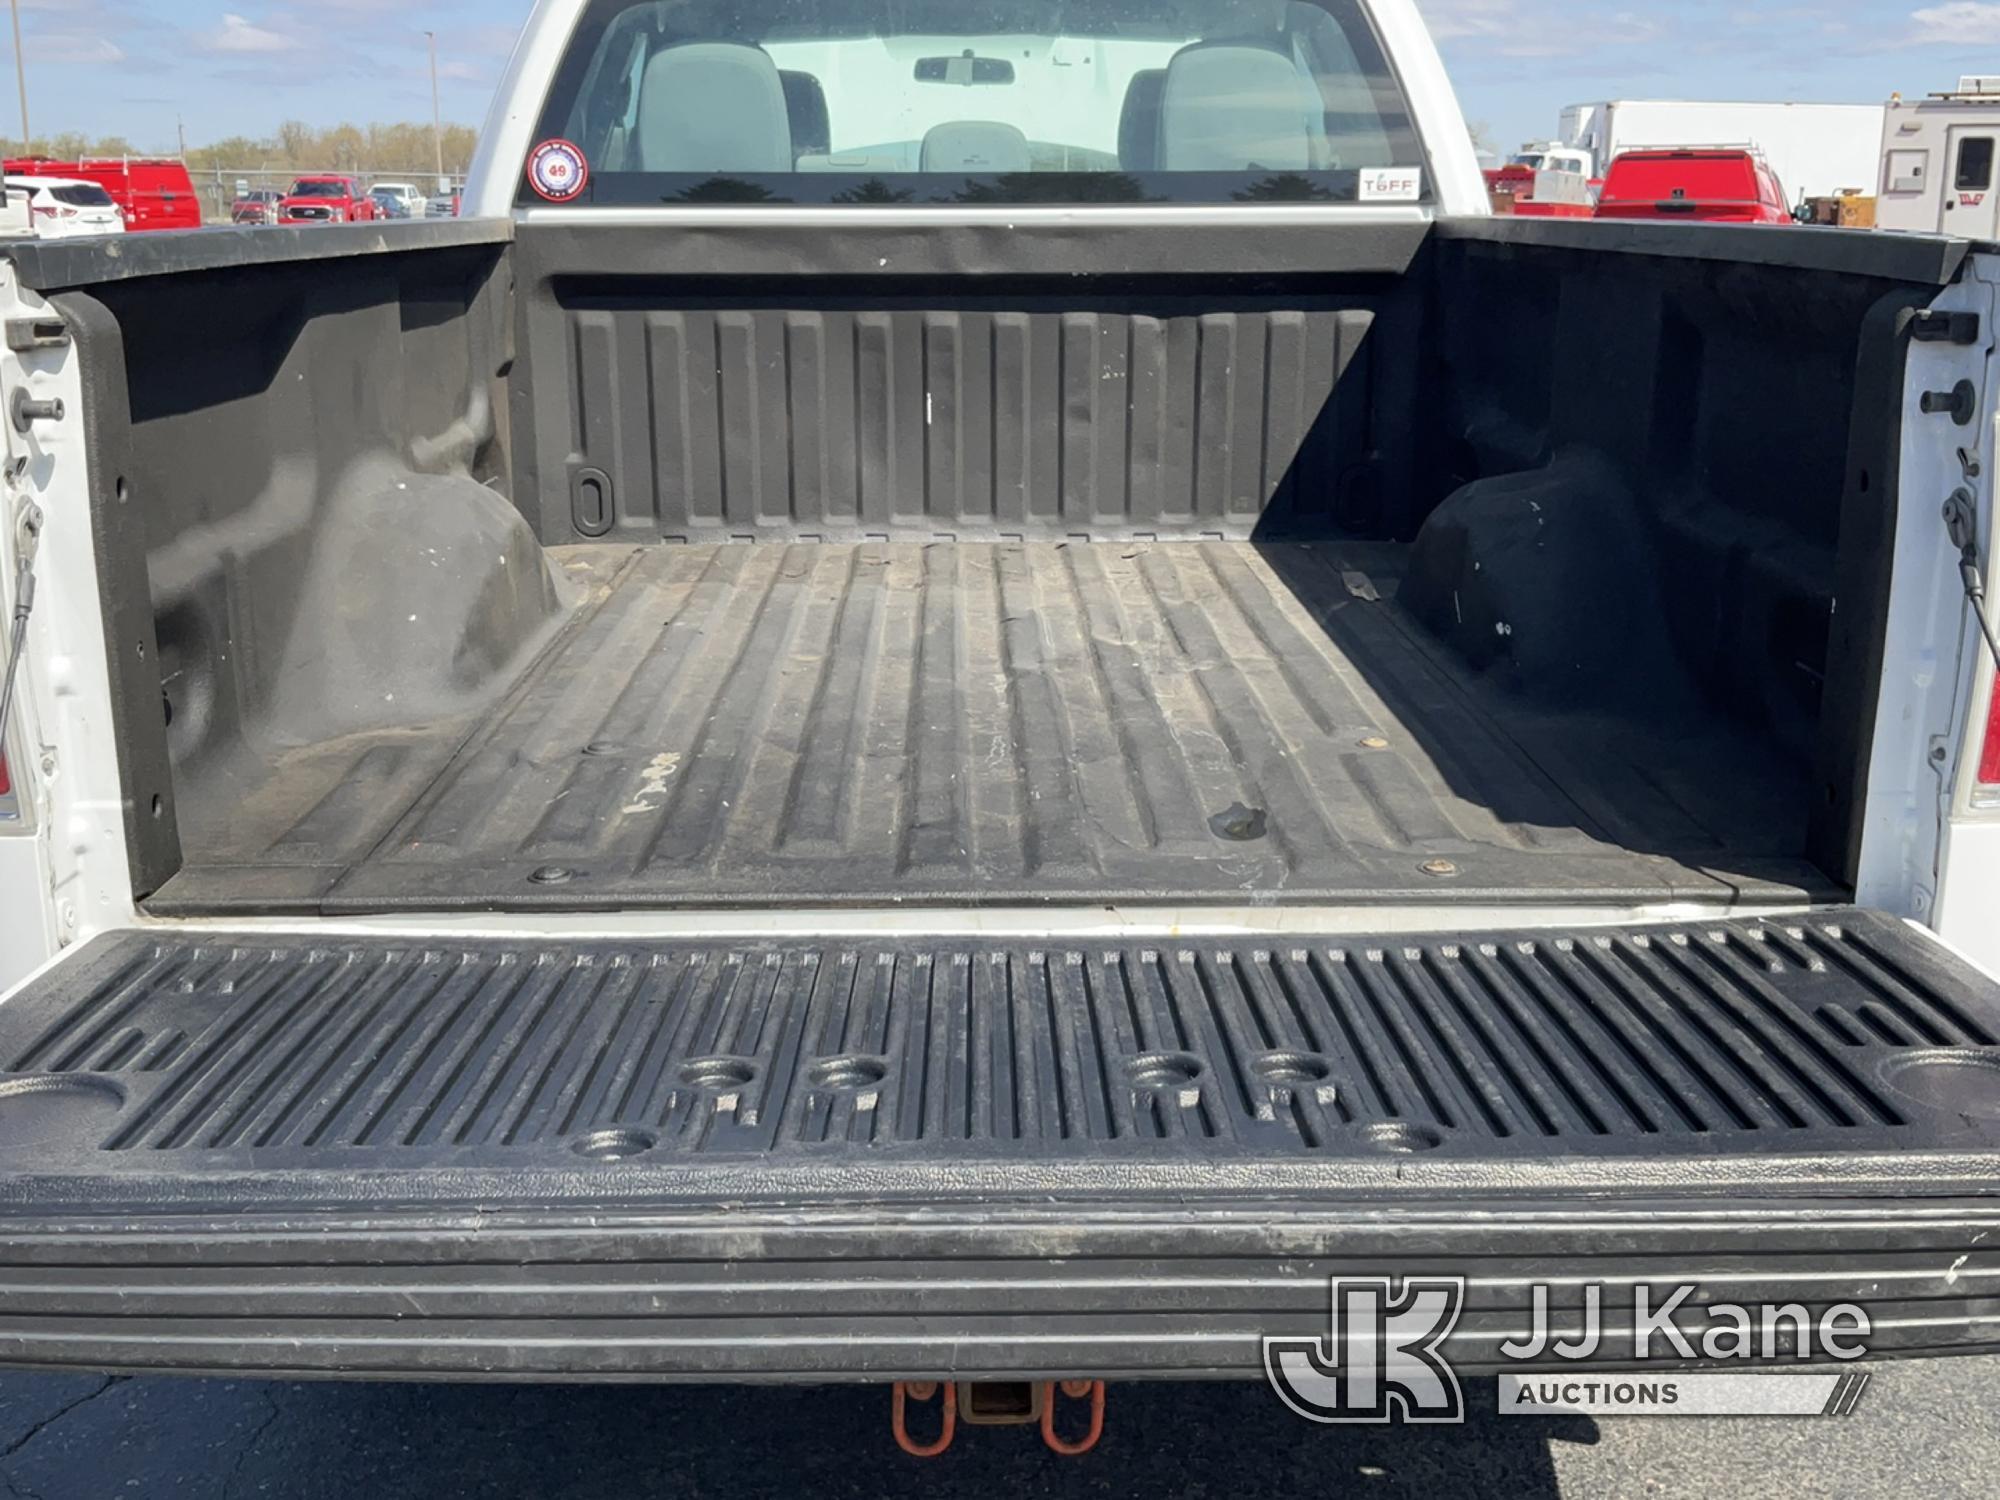 (Maple Lake, MN) 2013 Ford F150 Extended-Cab Pickup Truck Runs & Moves) (Check Engine Light On, Exha